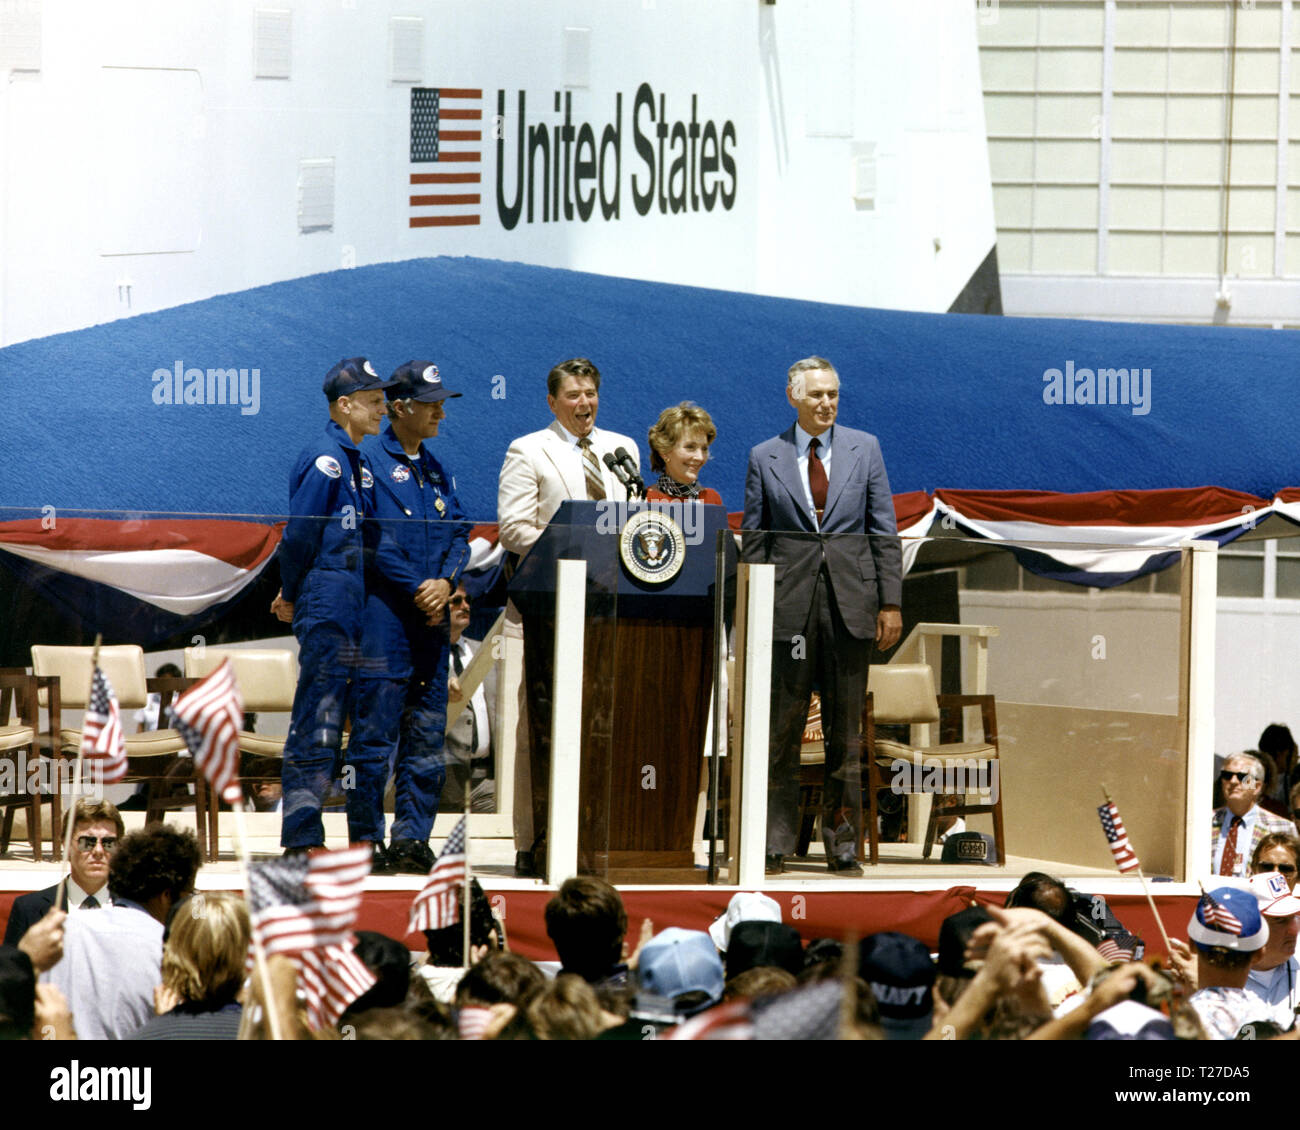 President Ronald Reagan speaks to a crowd of more than 45,000 people at NASA's Dryden Flight Research Center following the landing of STS-4 on July 4, 1982. To the right of the President are Mrs. Reagan and NASA Administrator James M. Beggs. To the left are STS-4 Columbia astronauts Thomas K. Mattingly and Henry W. Hartsfield, Jr. Prototype Space Shuttle Enterprise is in the background. Stock Photo